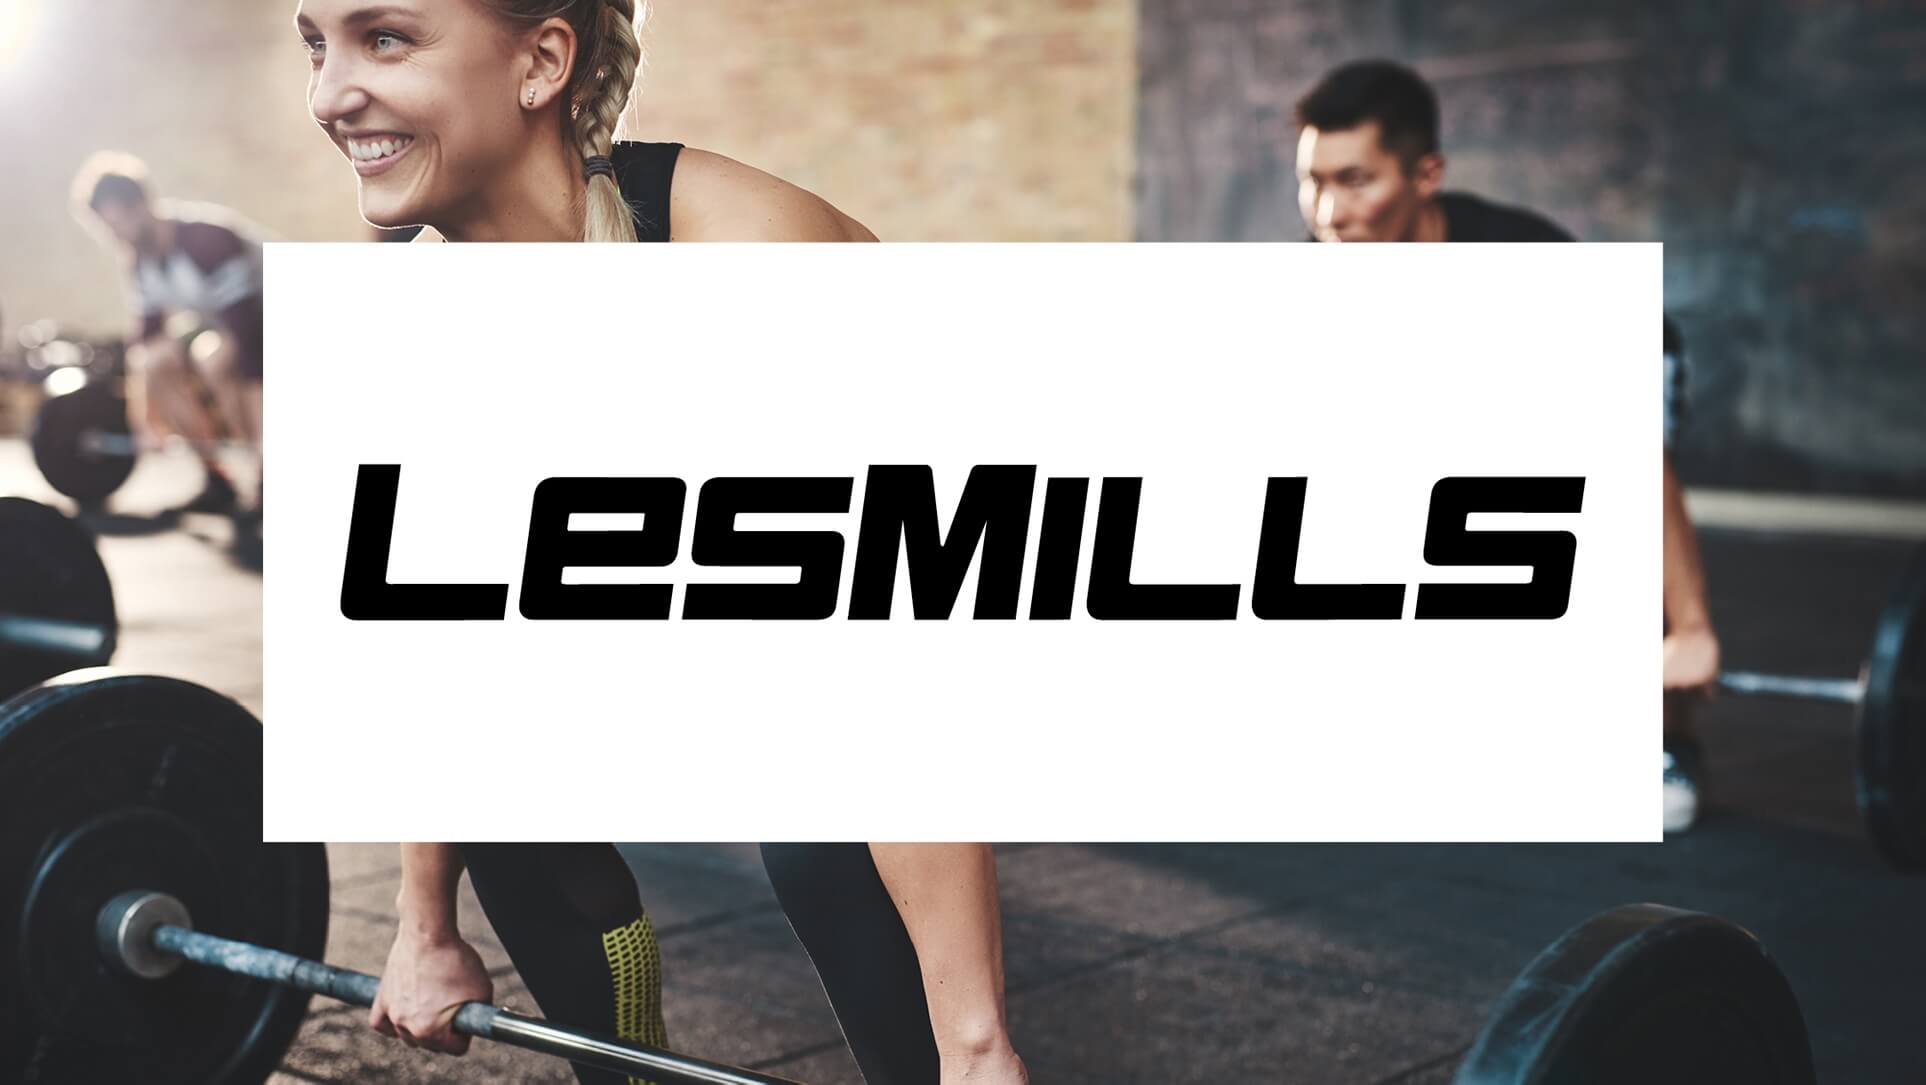 Les Mills Standardizes Global Video Conferencing with One-Touch Meetings BlueJeans by Verizon